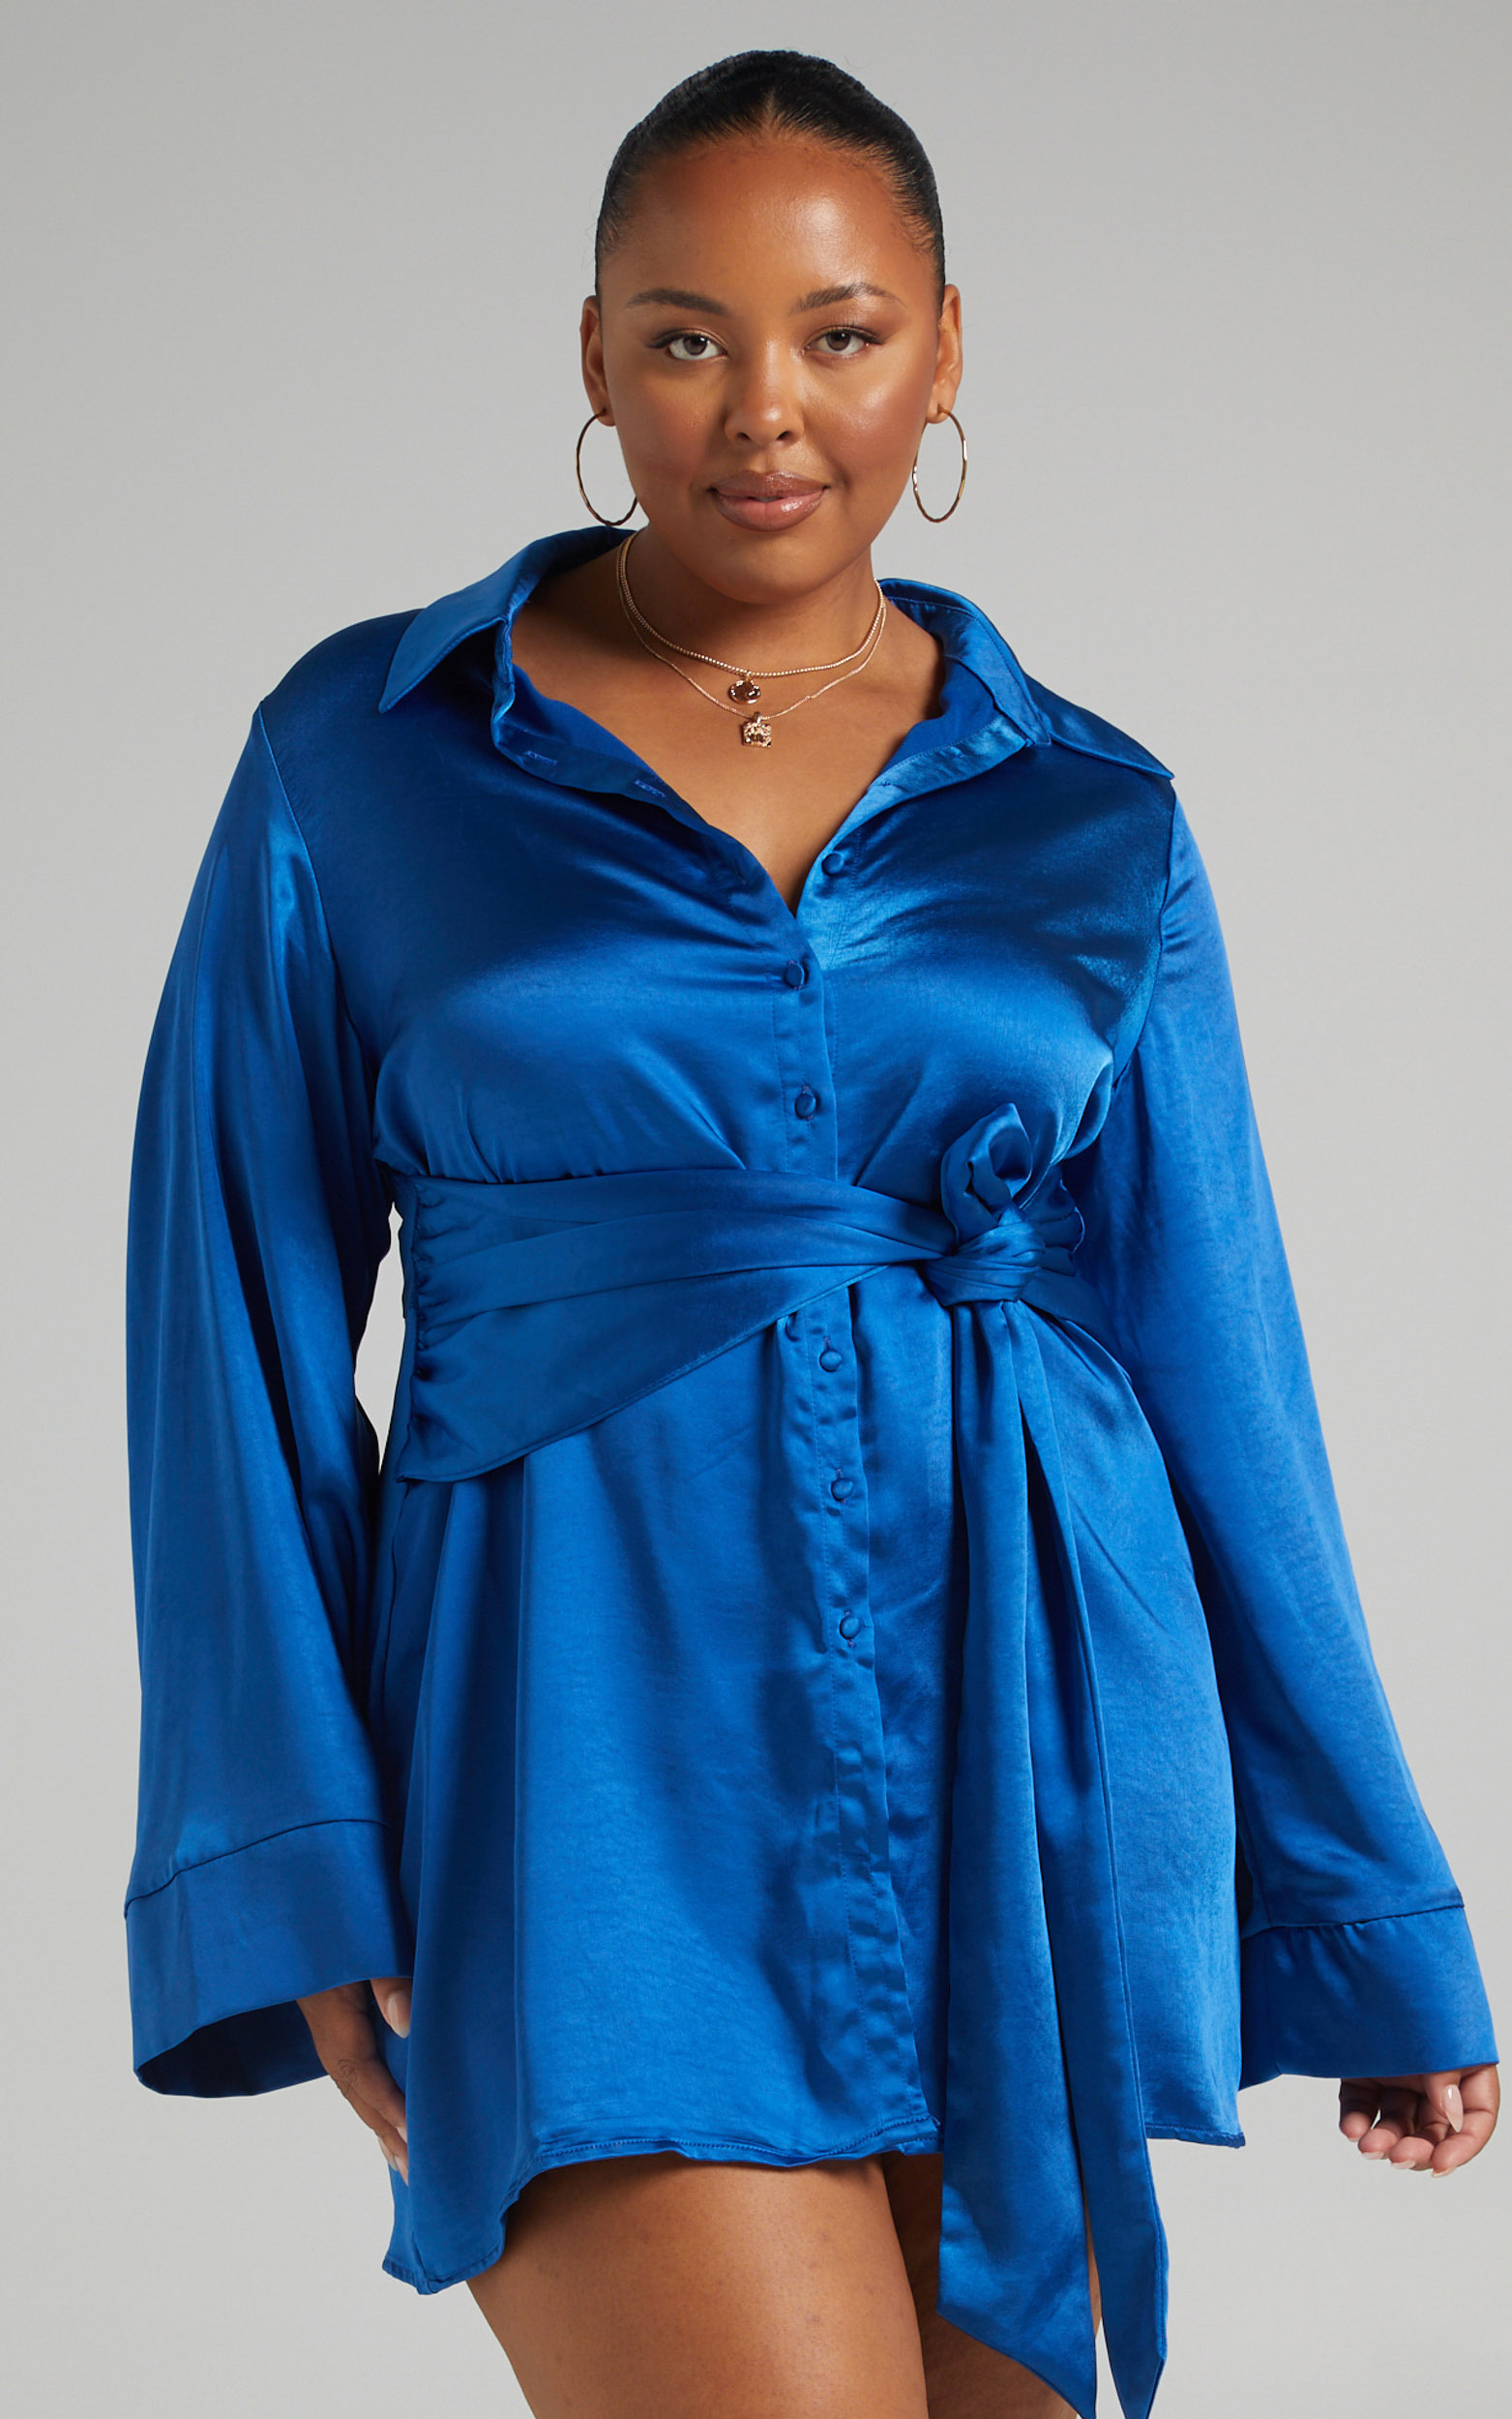 Hadid Button Down Waist Tie Shirt Dress in Electric Blue - 06, BLU2, hi-res image number null